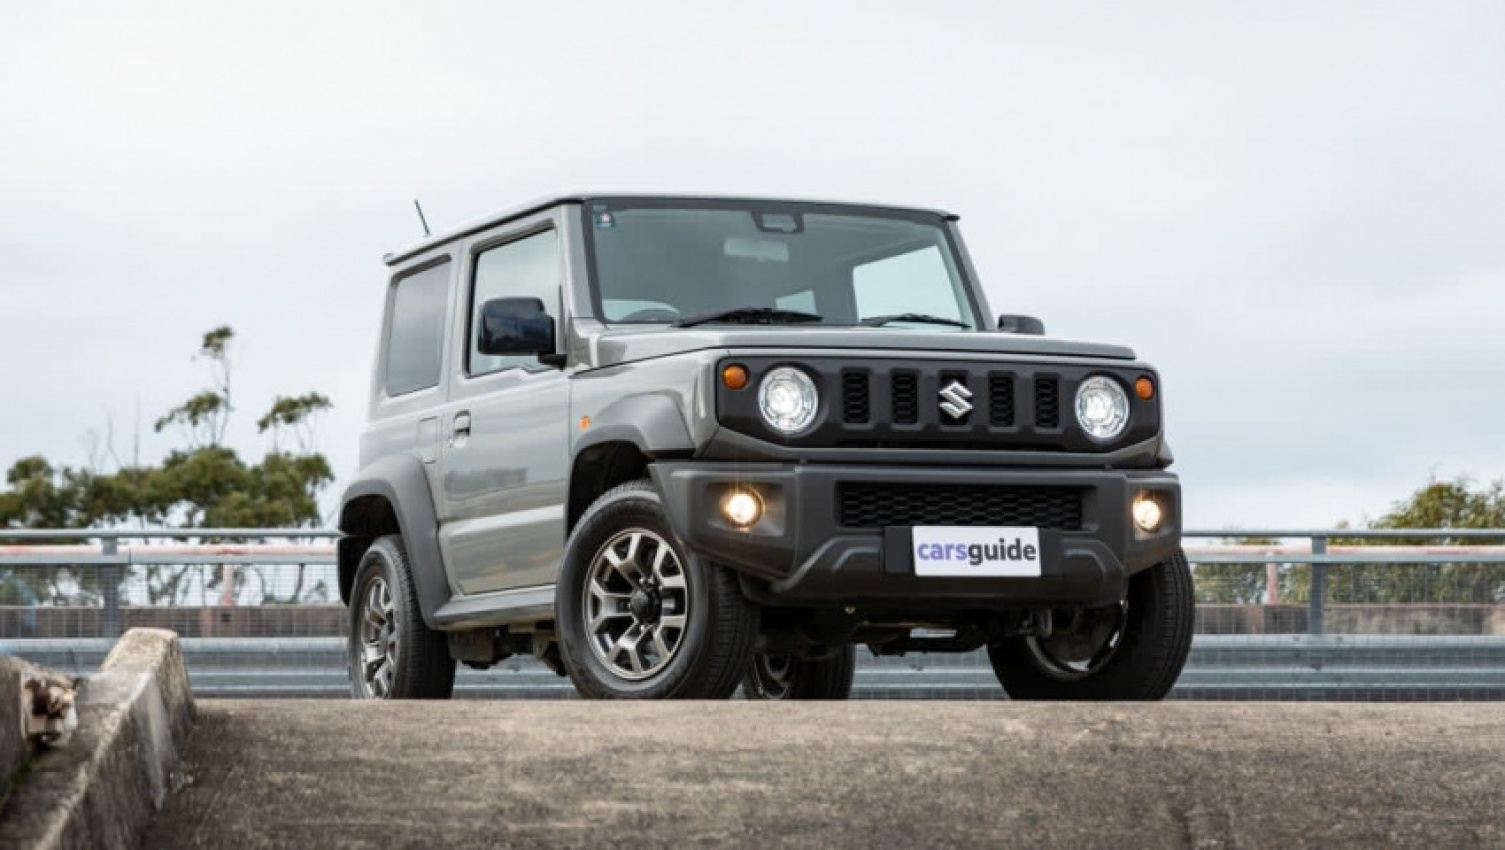 autos, cars, suzuki, industry news, off road, showroom news, suzuki jimny, suzuki jimny 2022, suzuki news, suzuki suv range, how long is the wait time for a 2022 suzuki jimny? update on delivery times for popular 4x4 light suv